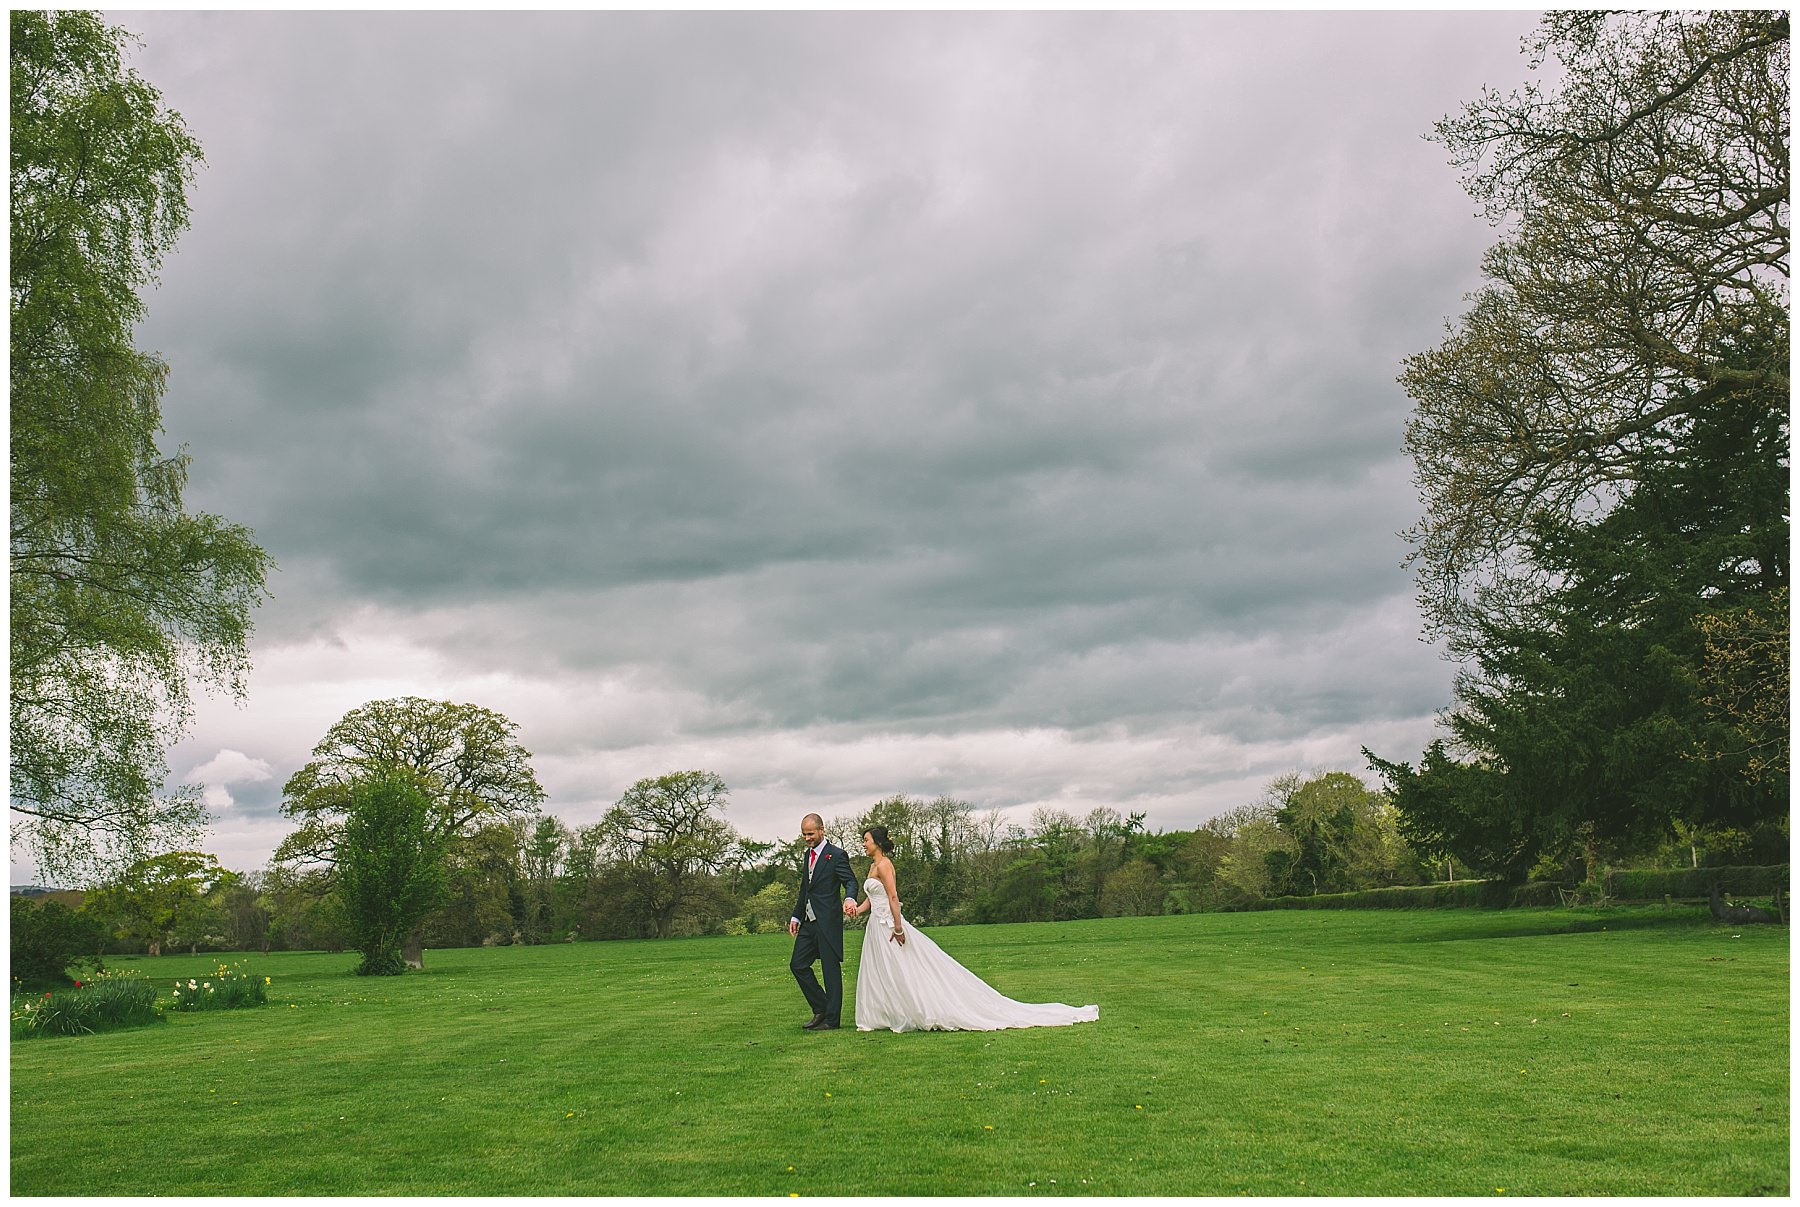 Newlyweds take a stoll over the lawns at Pentre Mawr